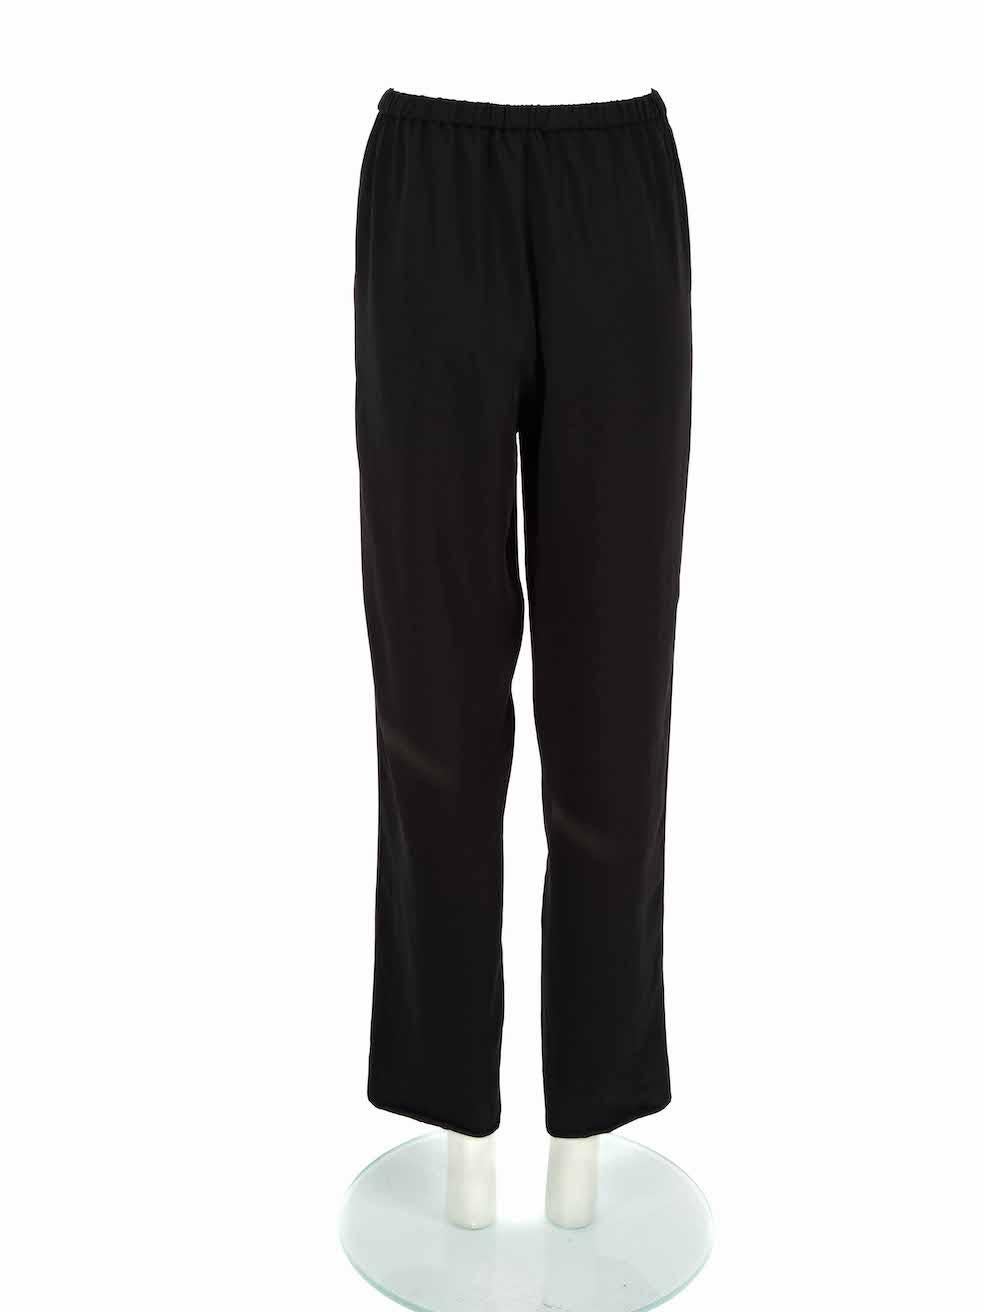 Totême Black Relaxed Fit Straight Leg Trousers Size XS In Excellent Condition For Sale In London, GB